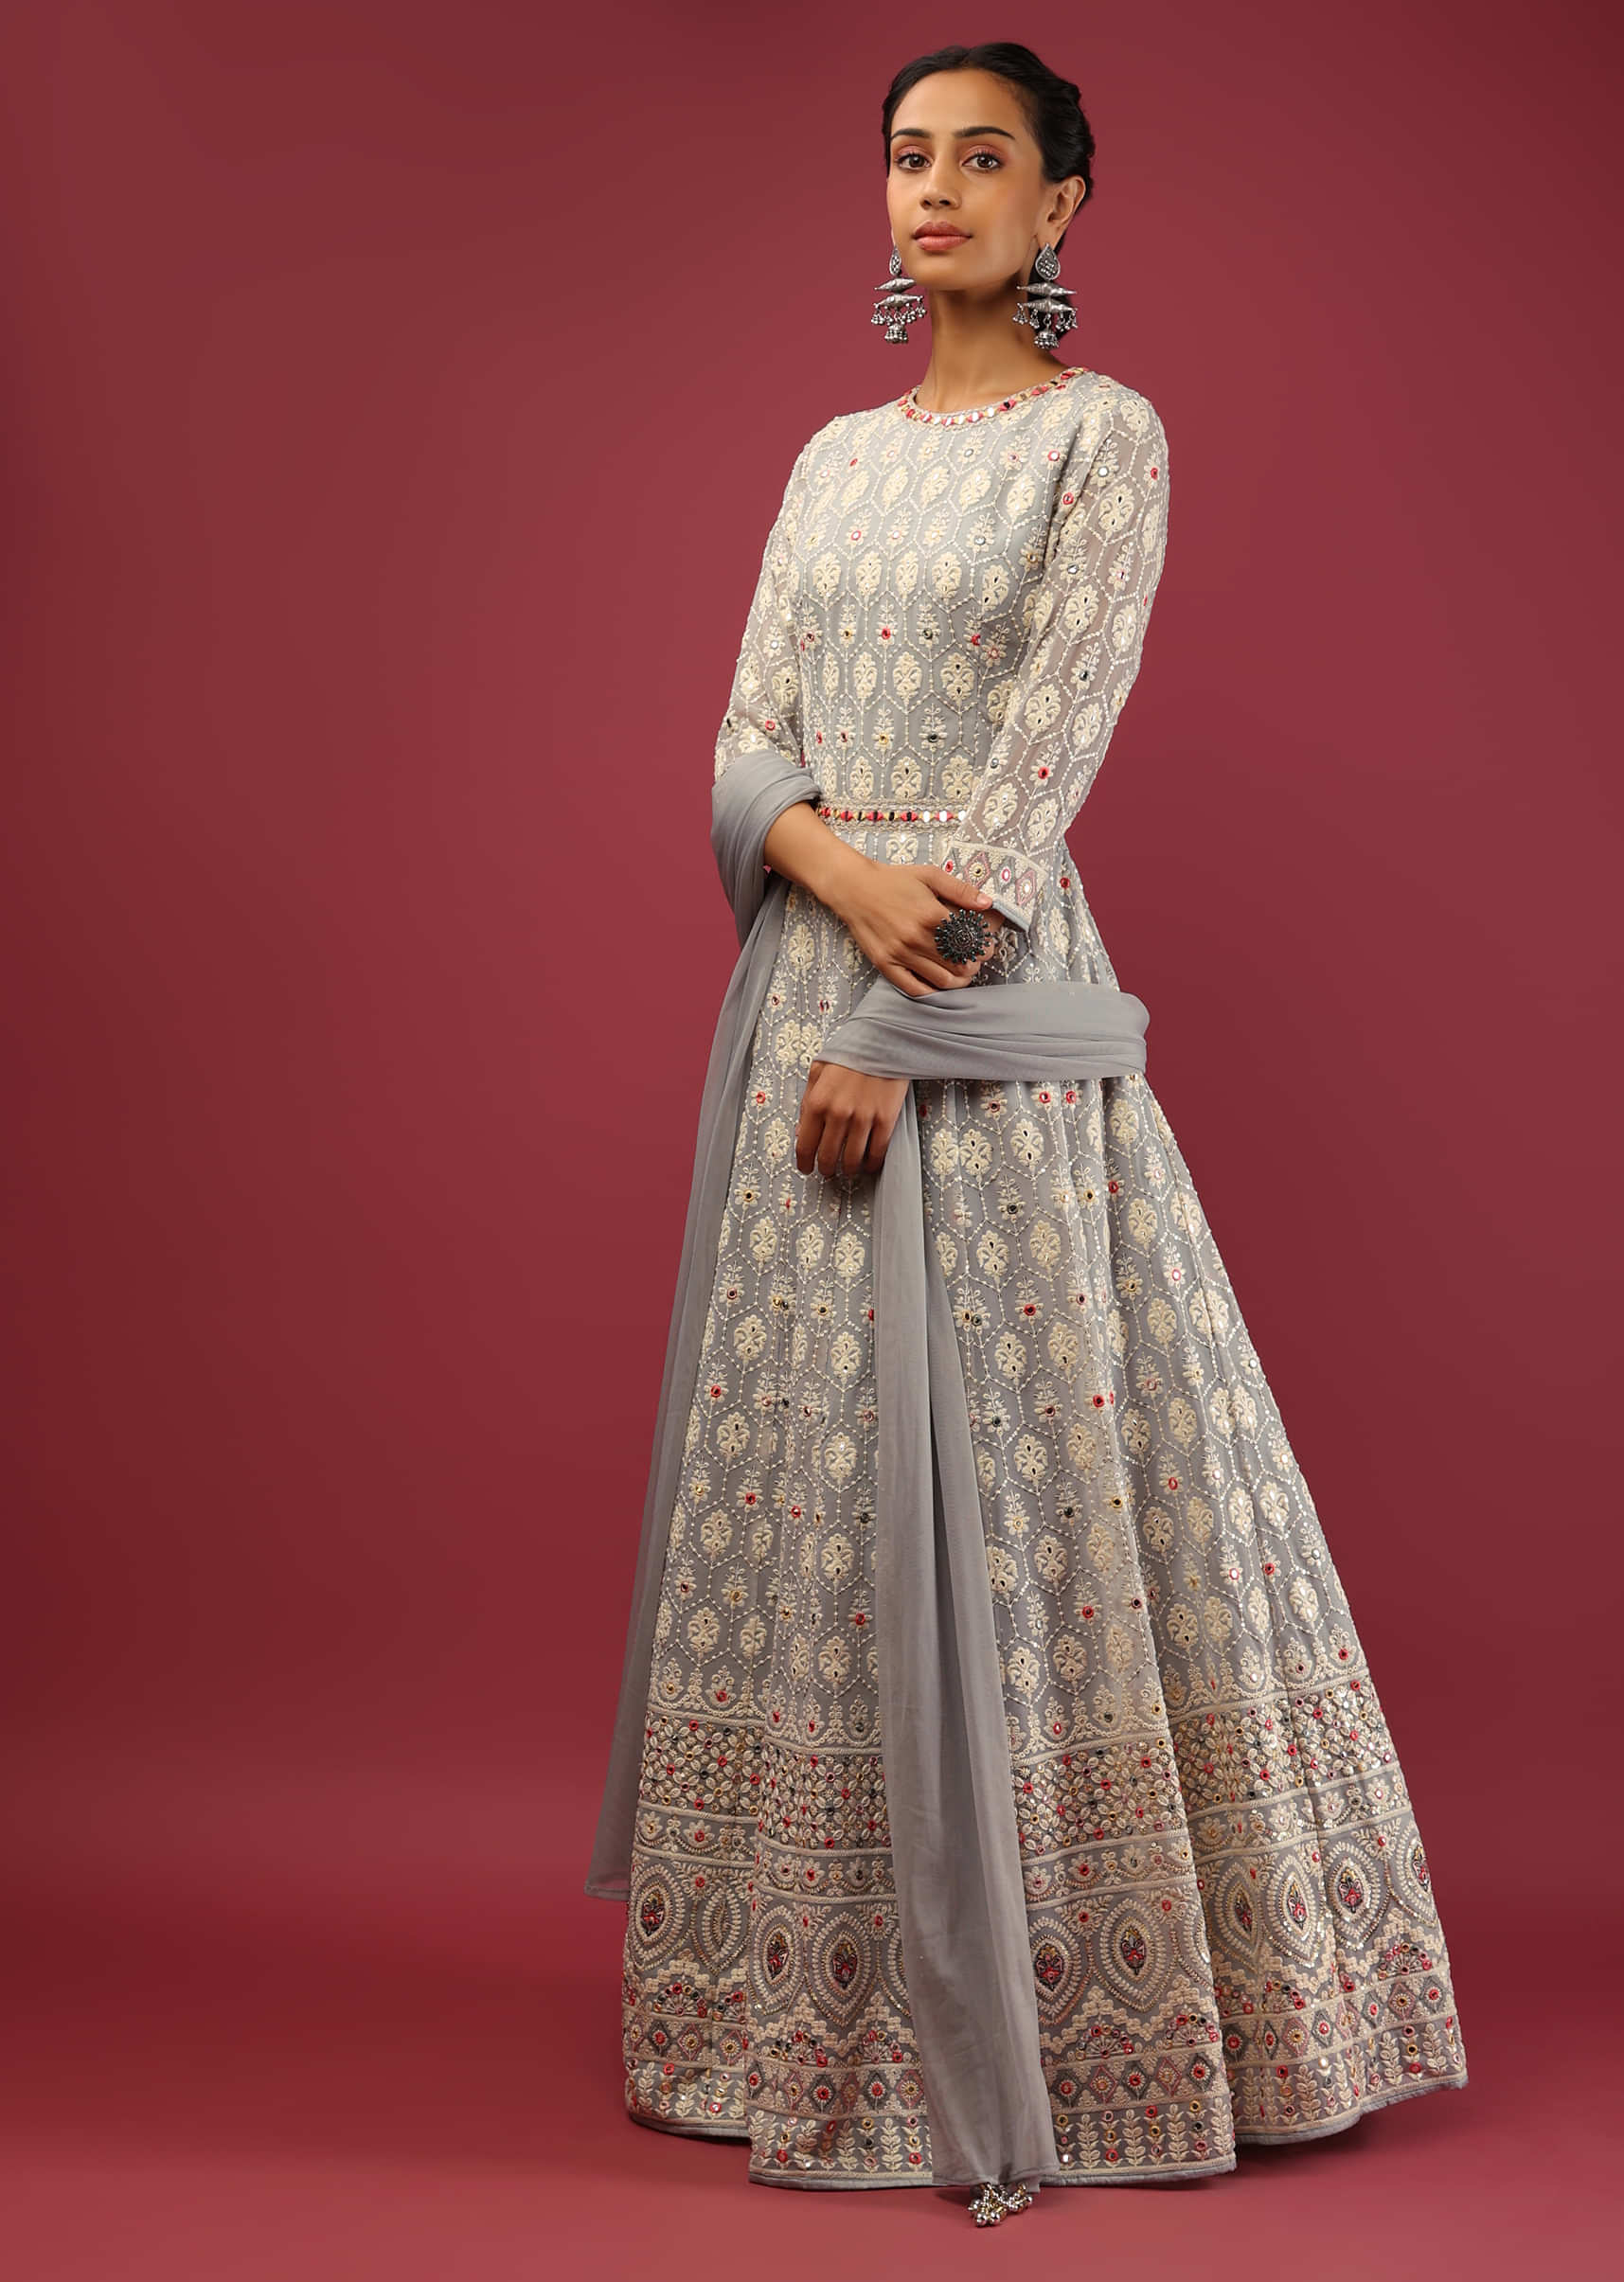 Metal Grey Anarkali Suit In Georgette With Lucknowi Thread Embroidered Moroccan Jaal And Multi Colored Abla Accents  